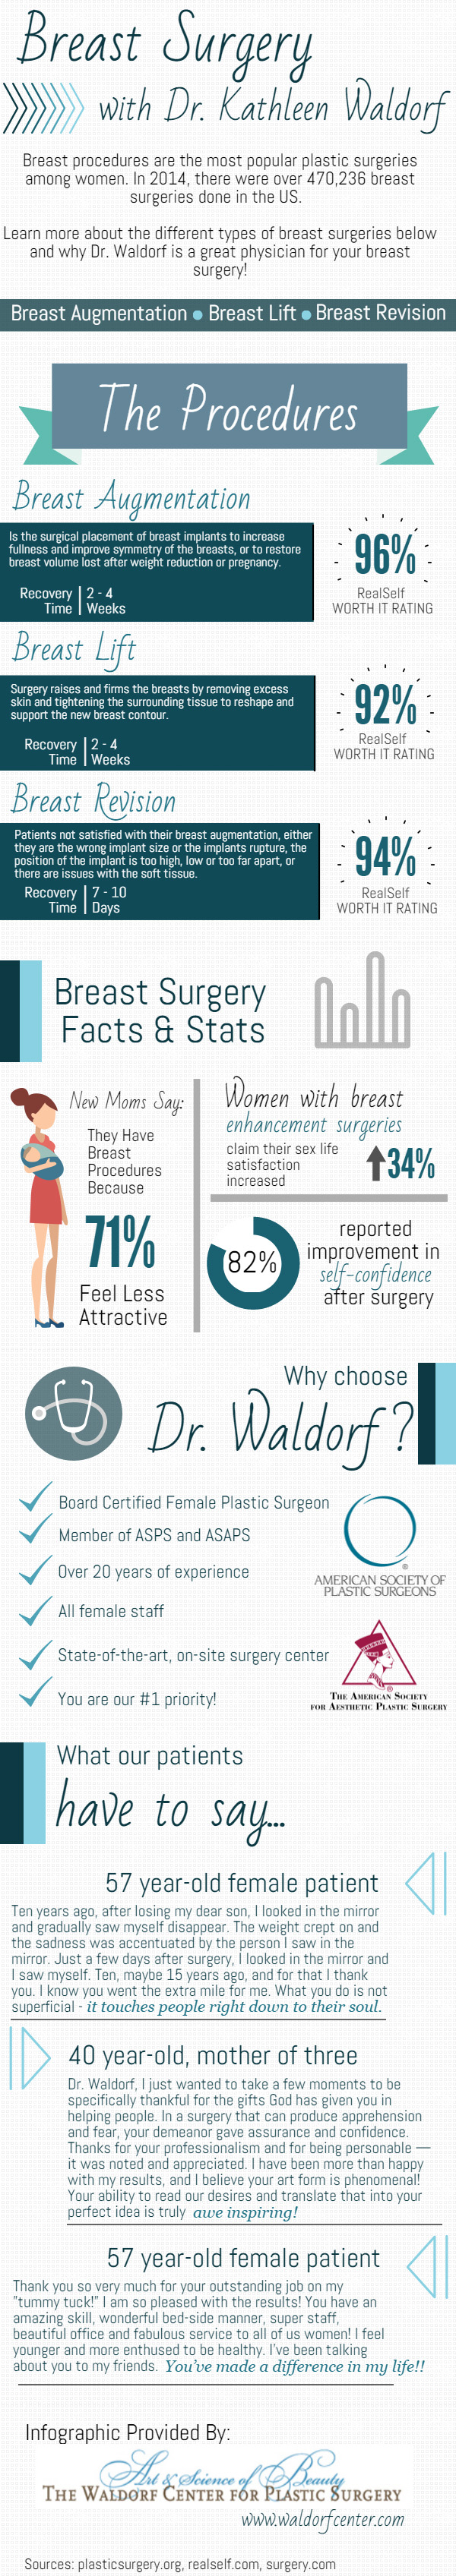 Waldorf - Breast Surgery - Infographic_6-23-15